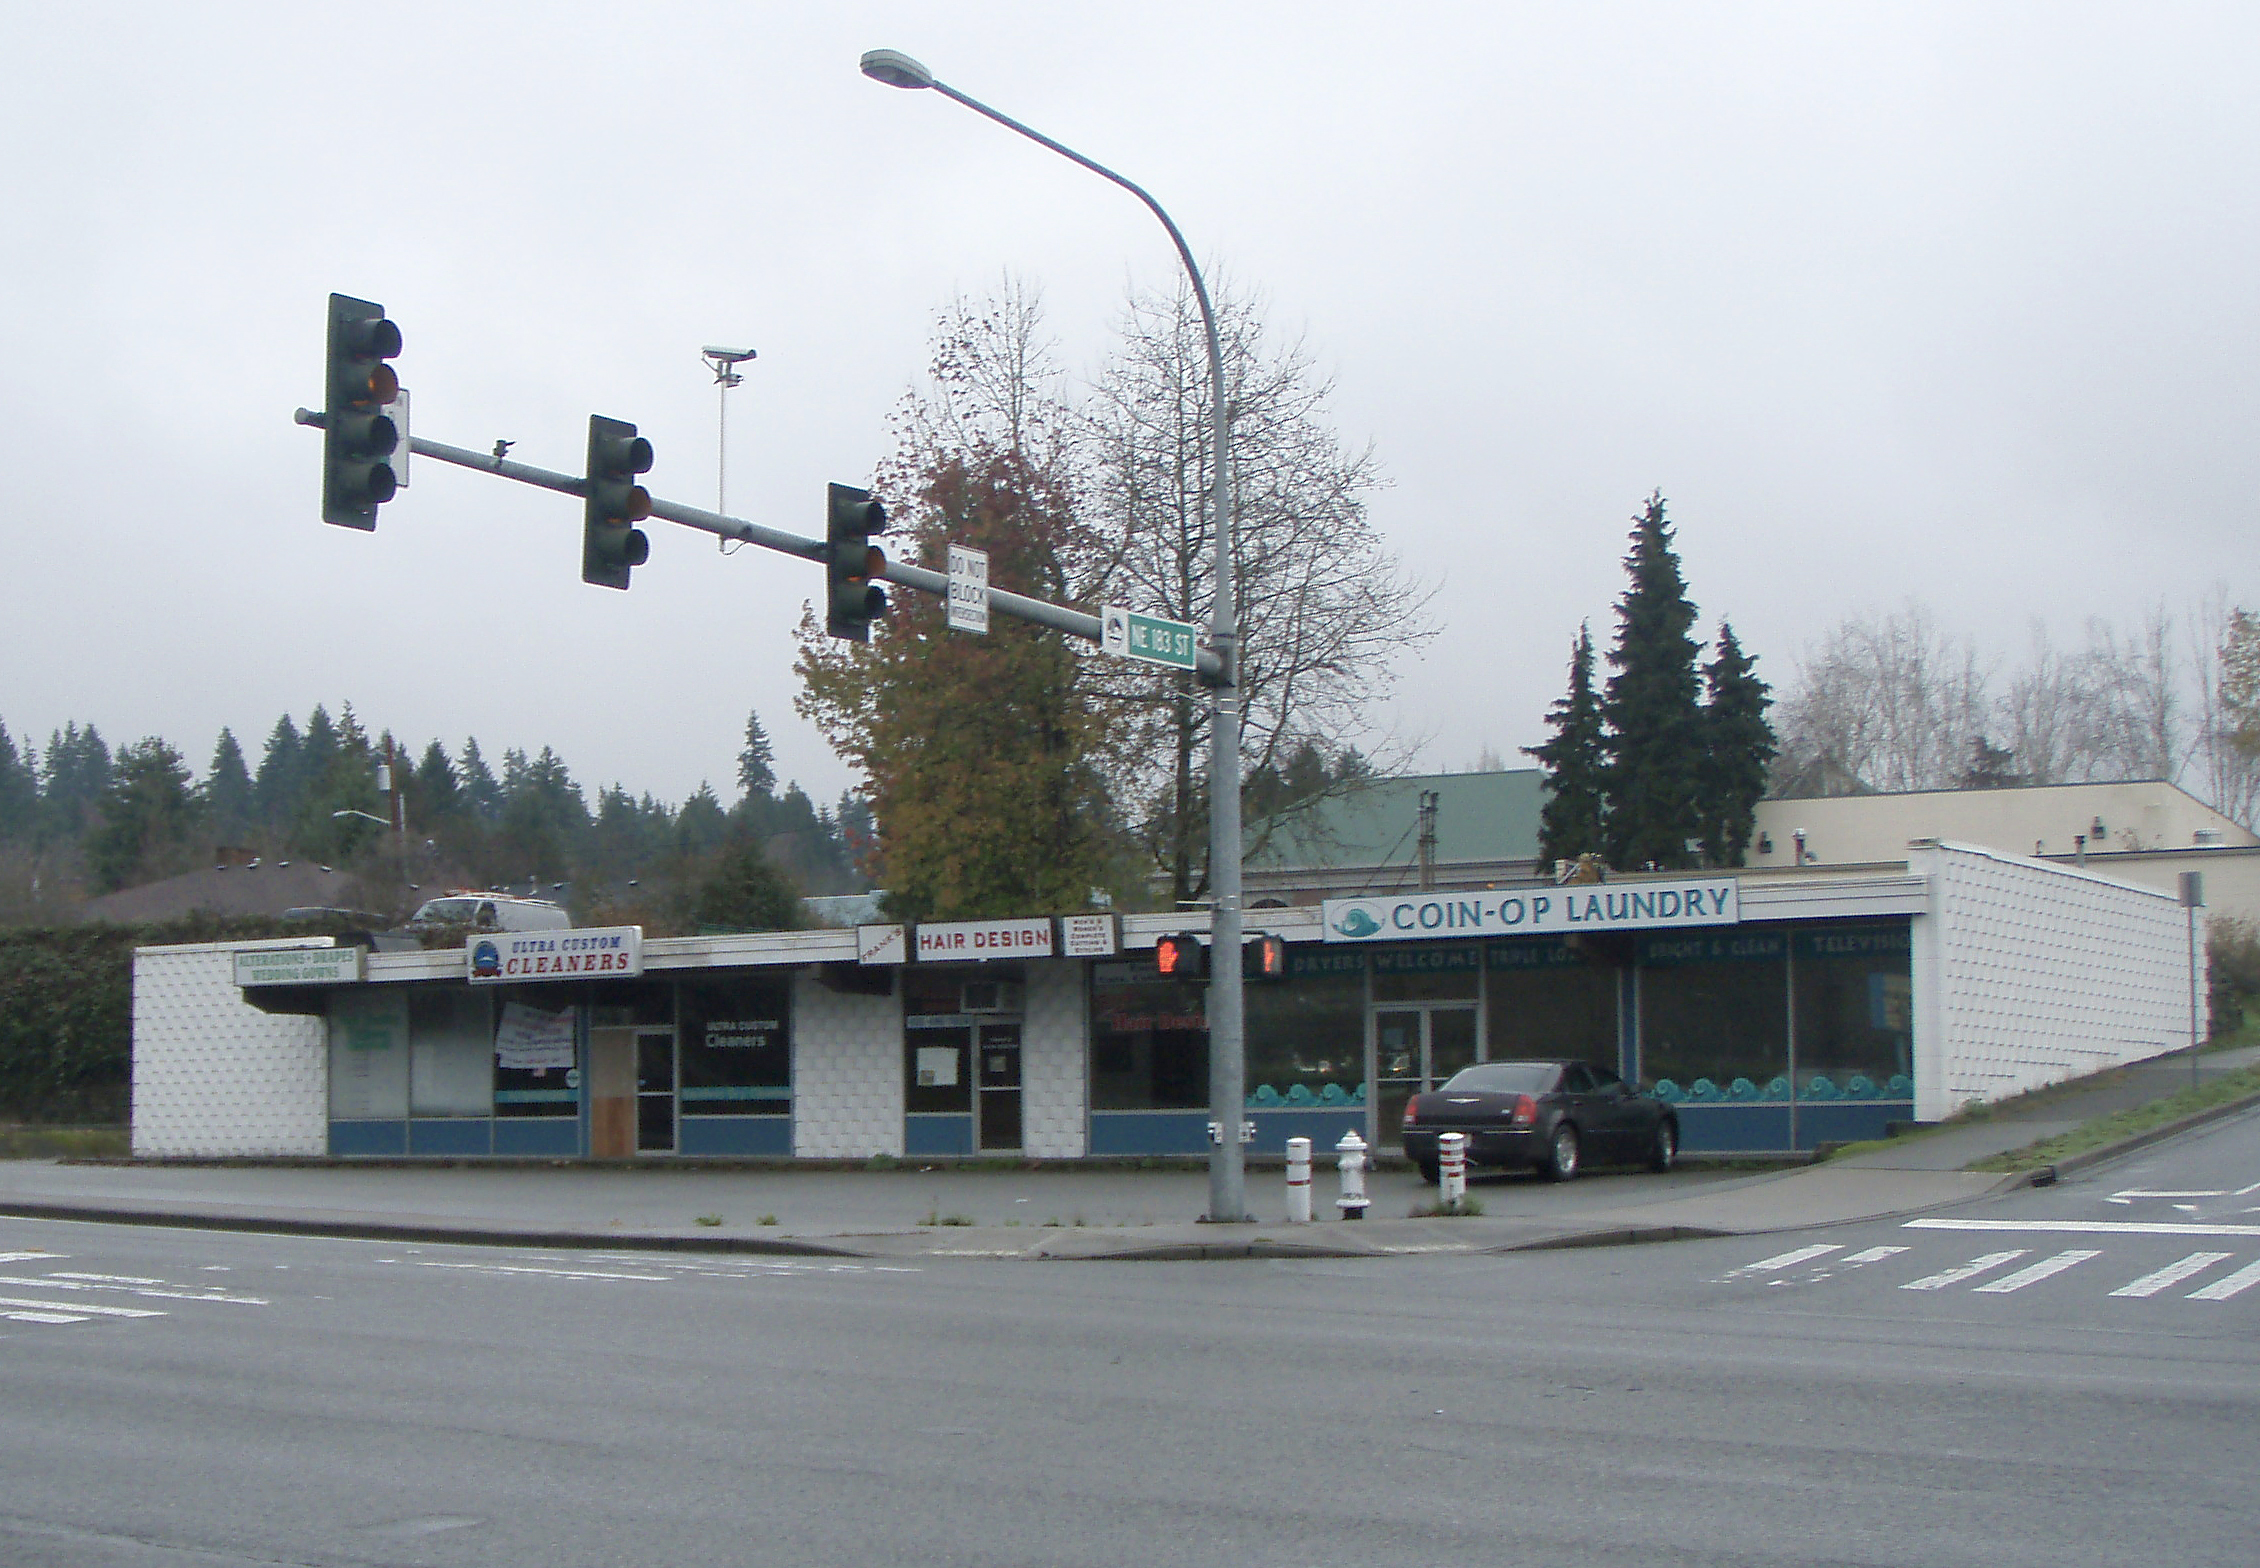 Old stripmall with dry cleaners, hair salon, and laundromat